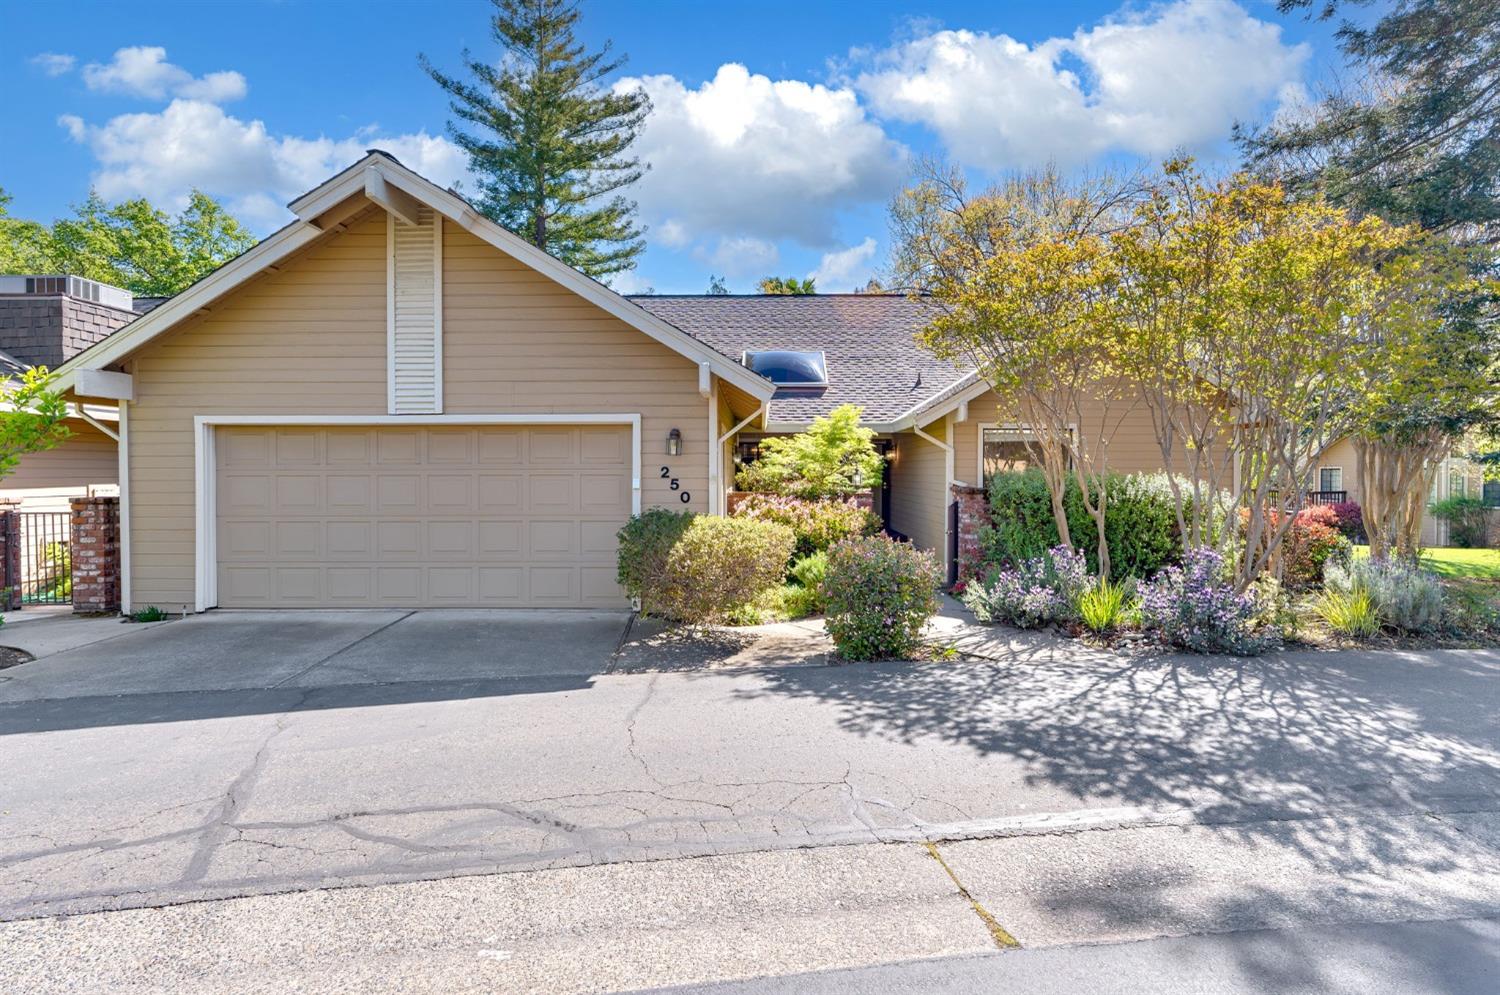 Photo of 250 Winding Canyon Ln in Folsom, CA